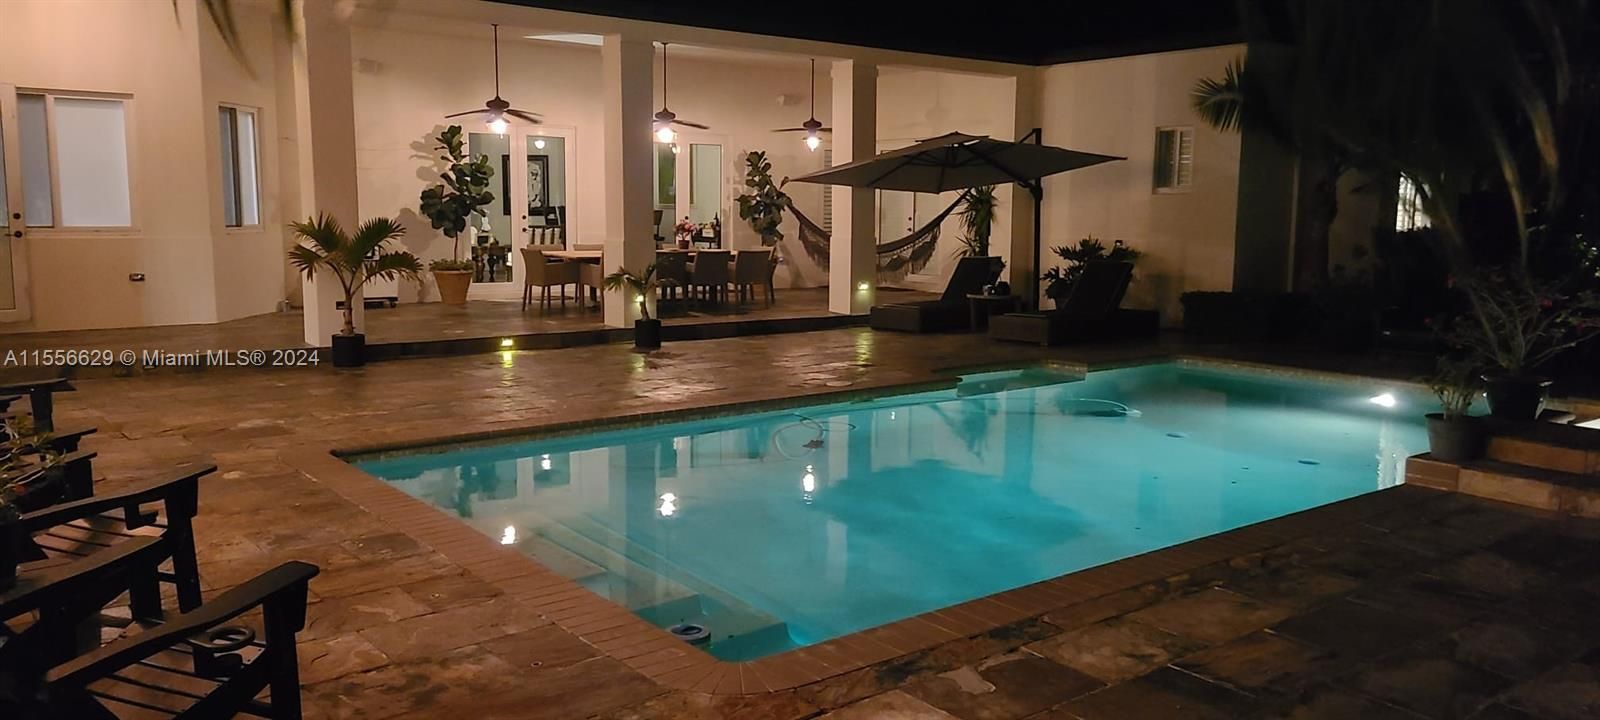 Nighttime-Pool & Outdoor Dining